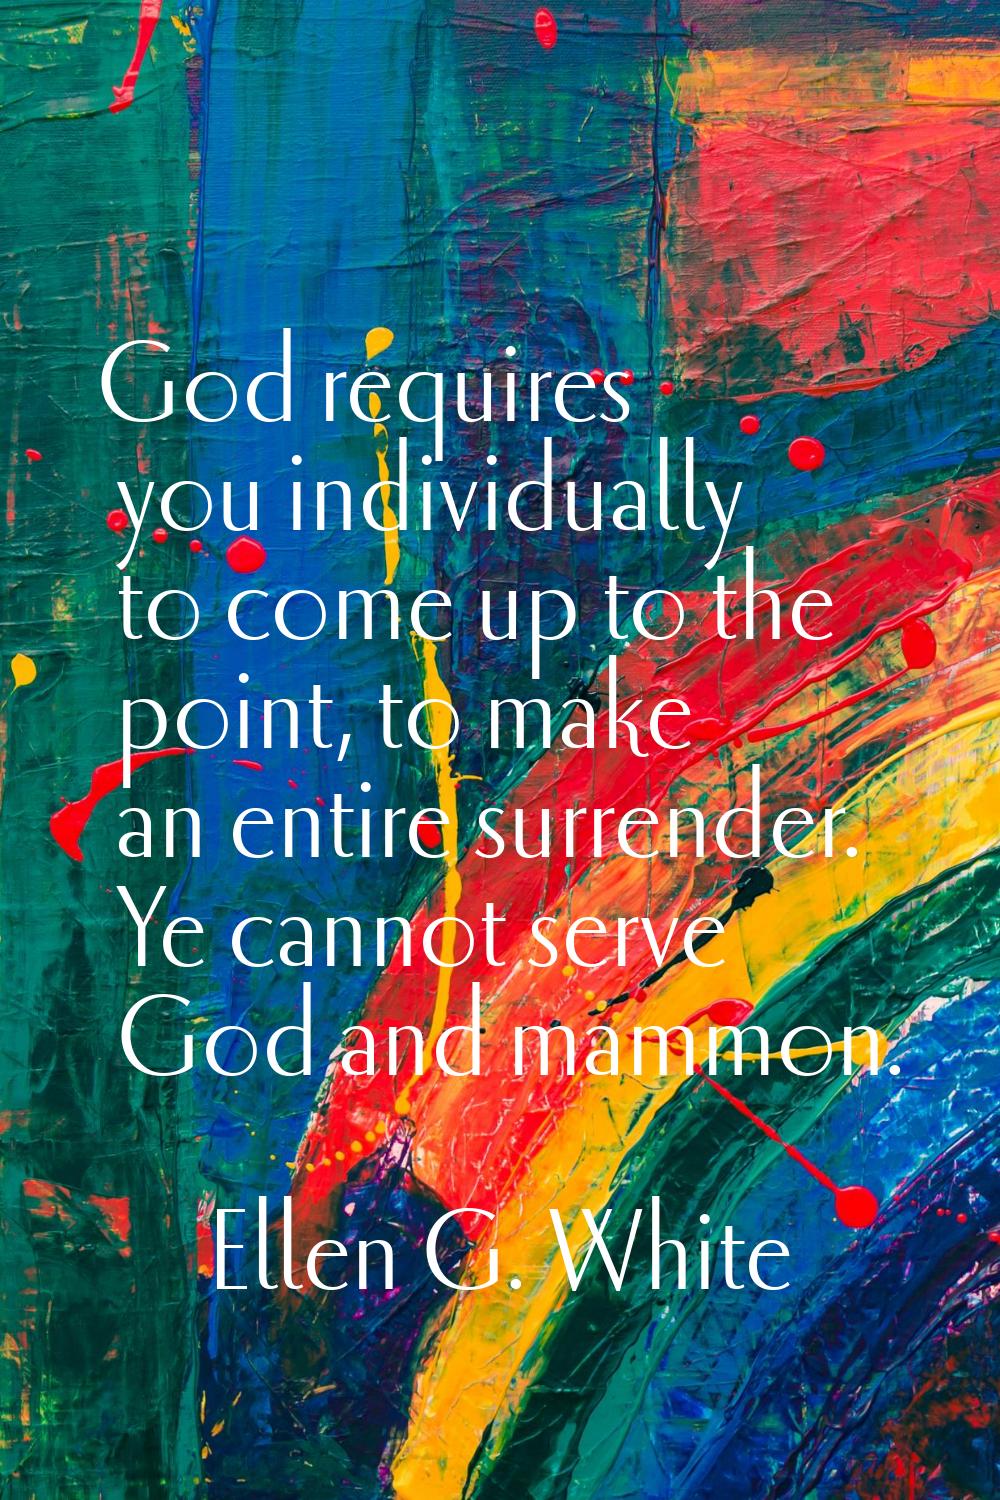 God requires you individually to come up to the point, to make an entire surrender. Ye cannot serve